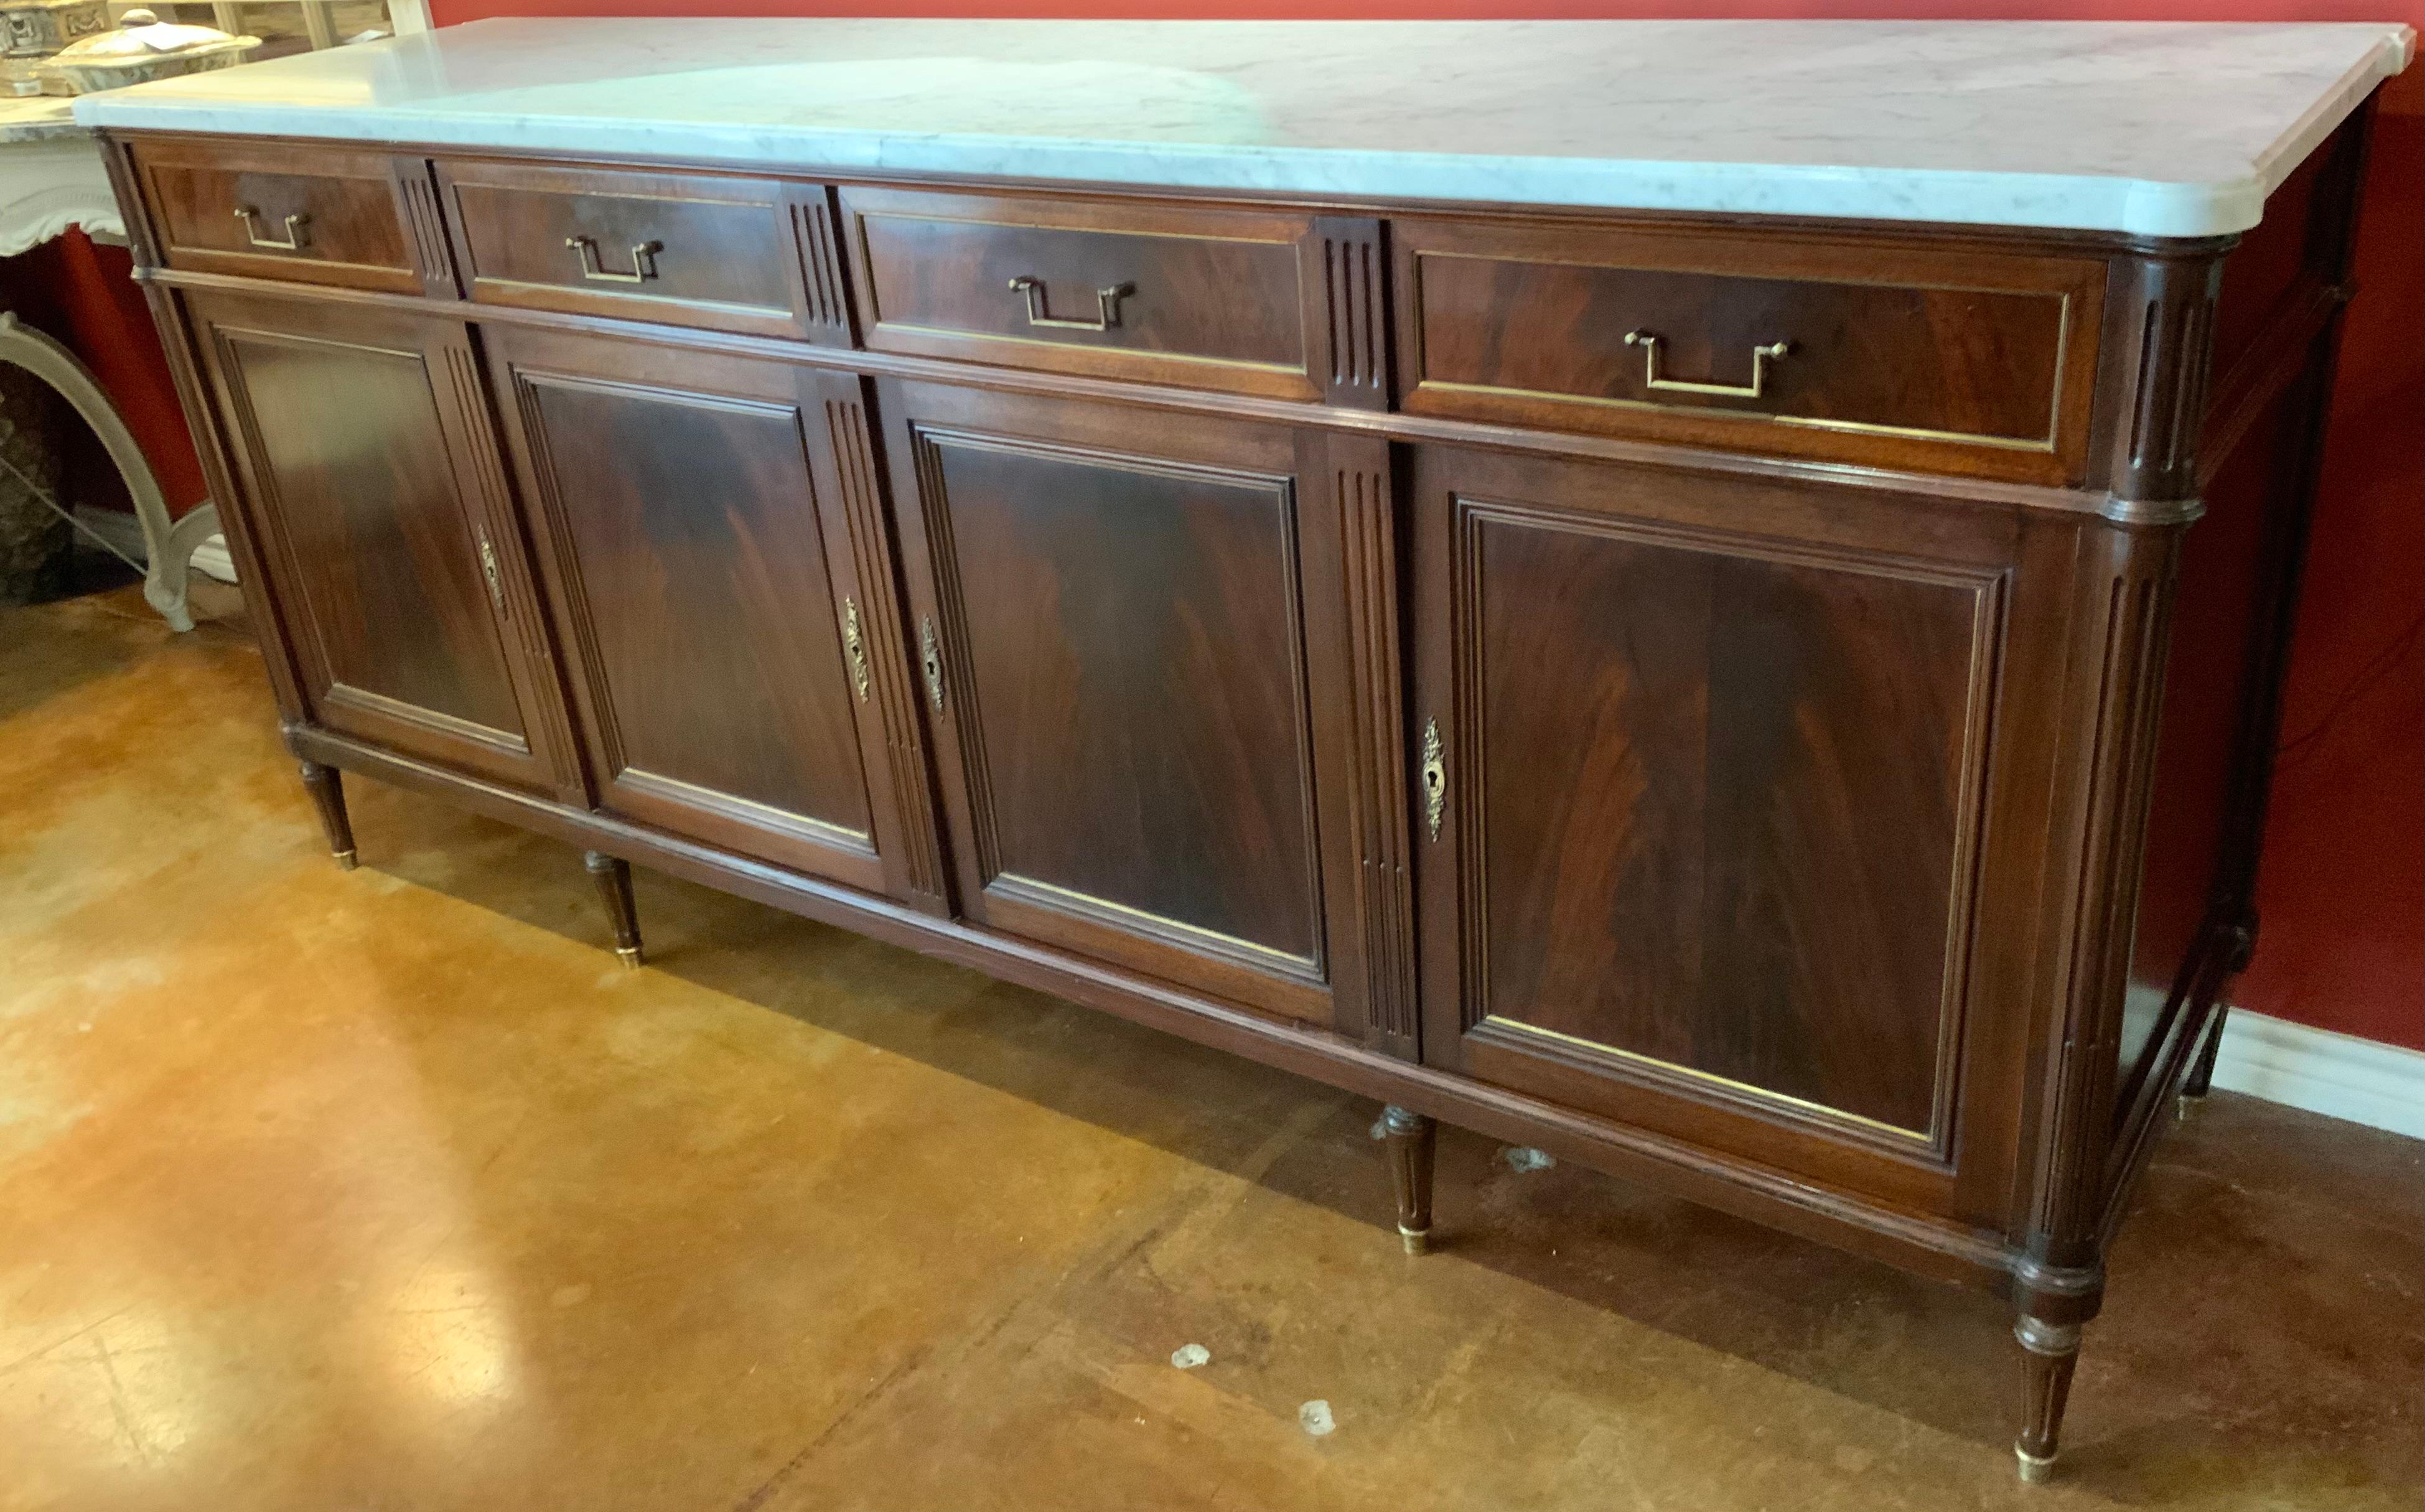 The quality of the mahogany used in this piece is excellent 
It is flame / crotch mahogany which is exceptionally good.
The white marble top is original and has no repairs.
The finish is good and original.
It has four drawers over four doors that